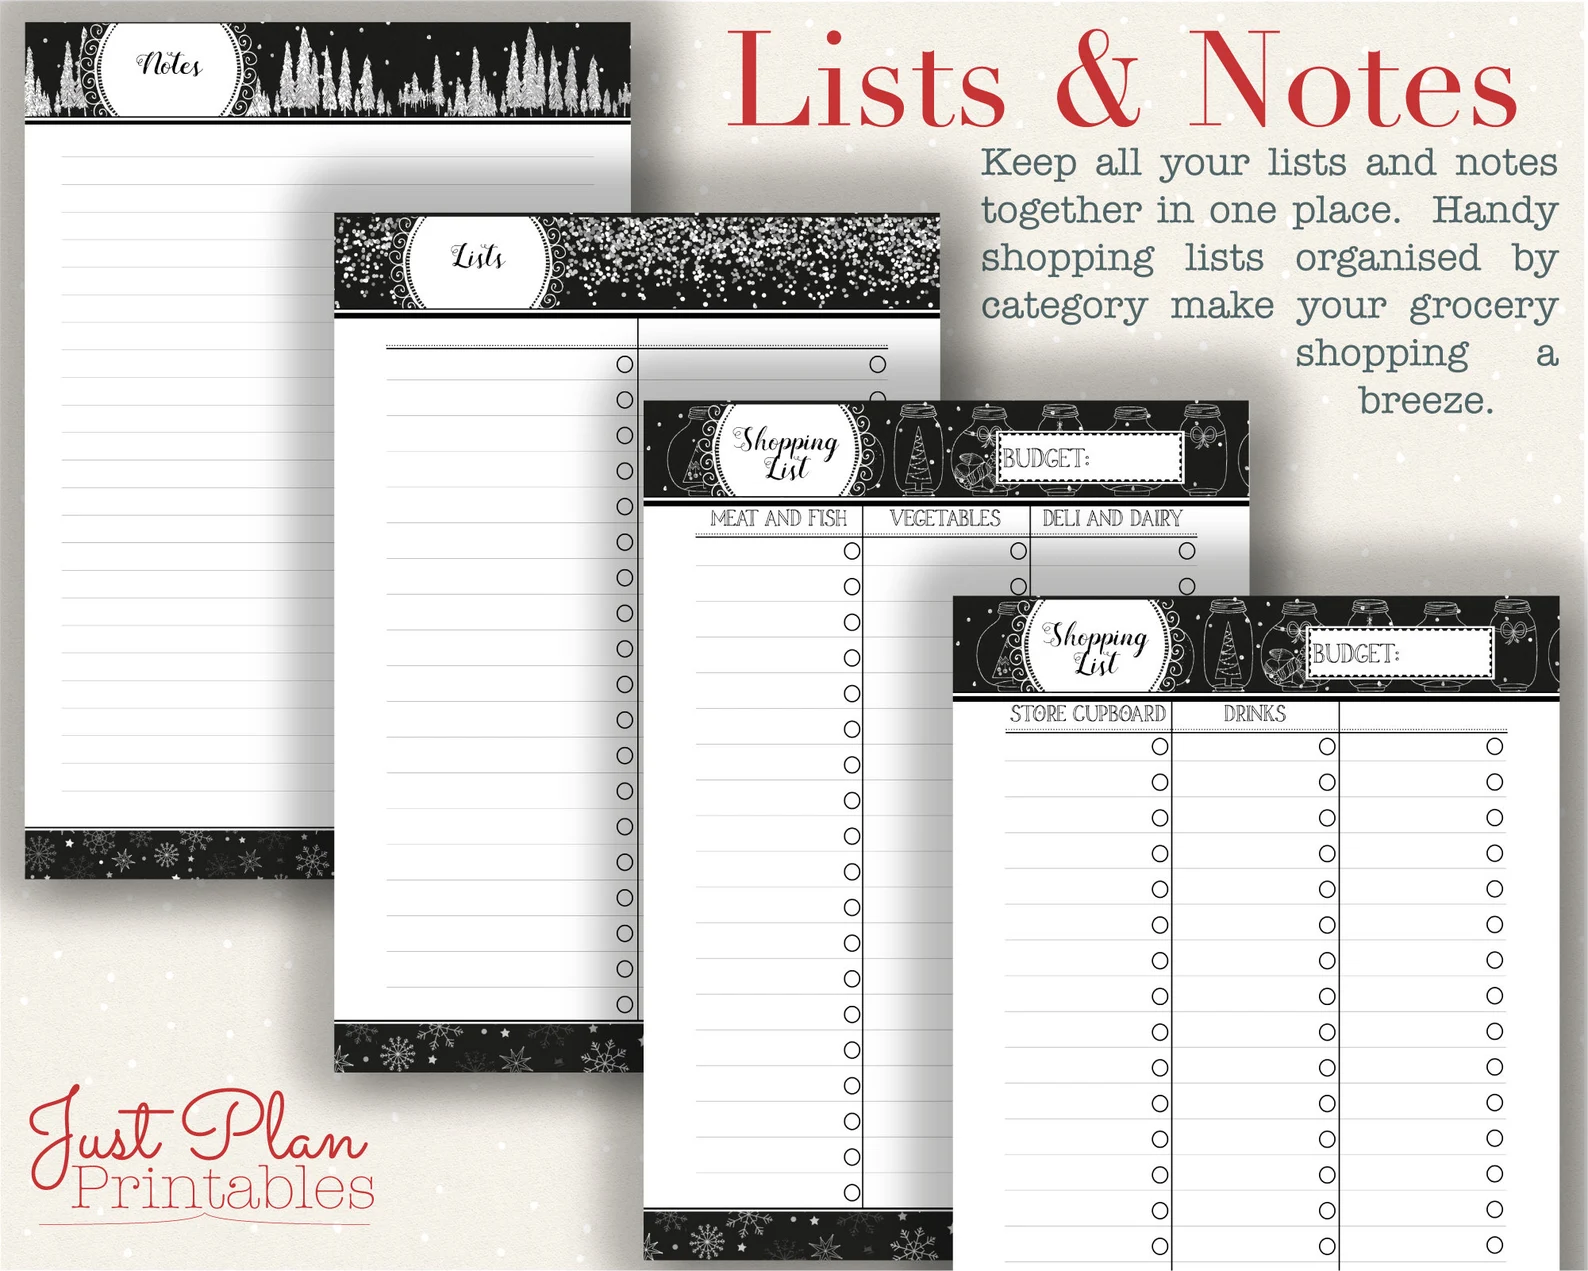 Christmas Planner Printables - Checklists and notes